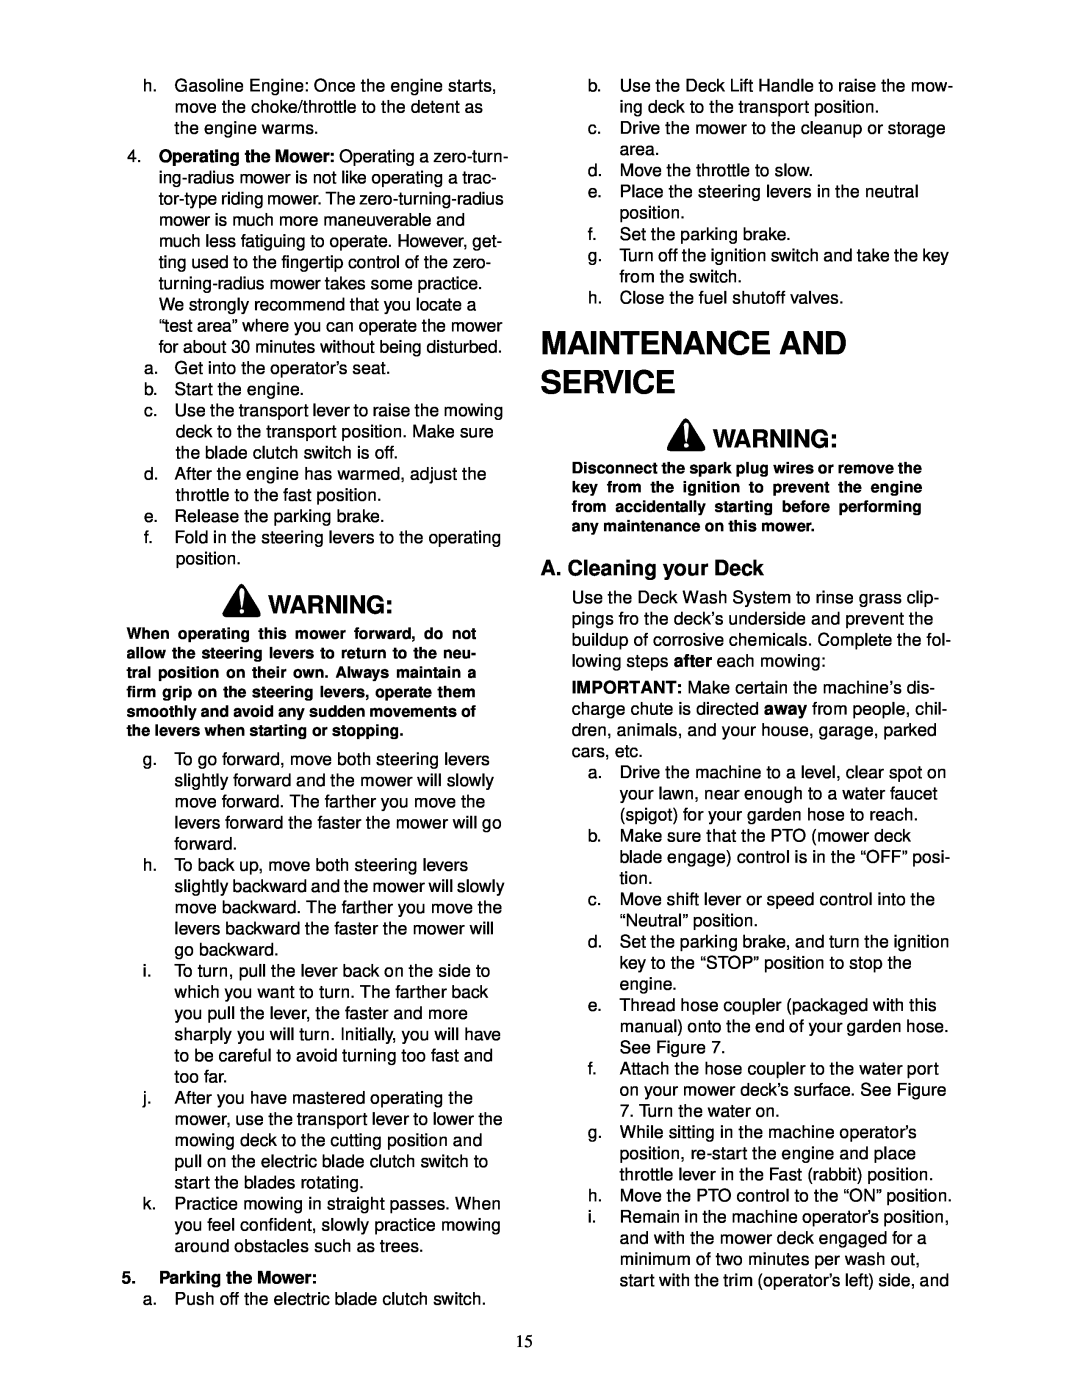 Cub Cadet 23HP Z-Force 50 service manual Maintenance And Service, A. Cleaning your Deck 